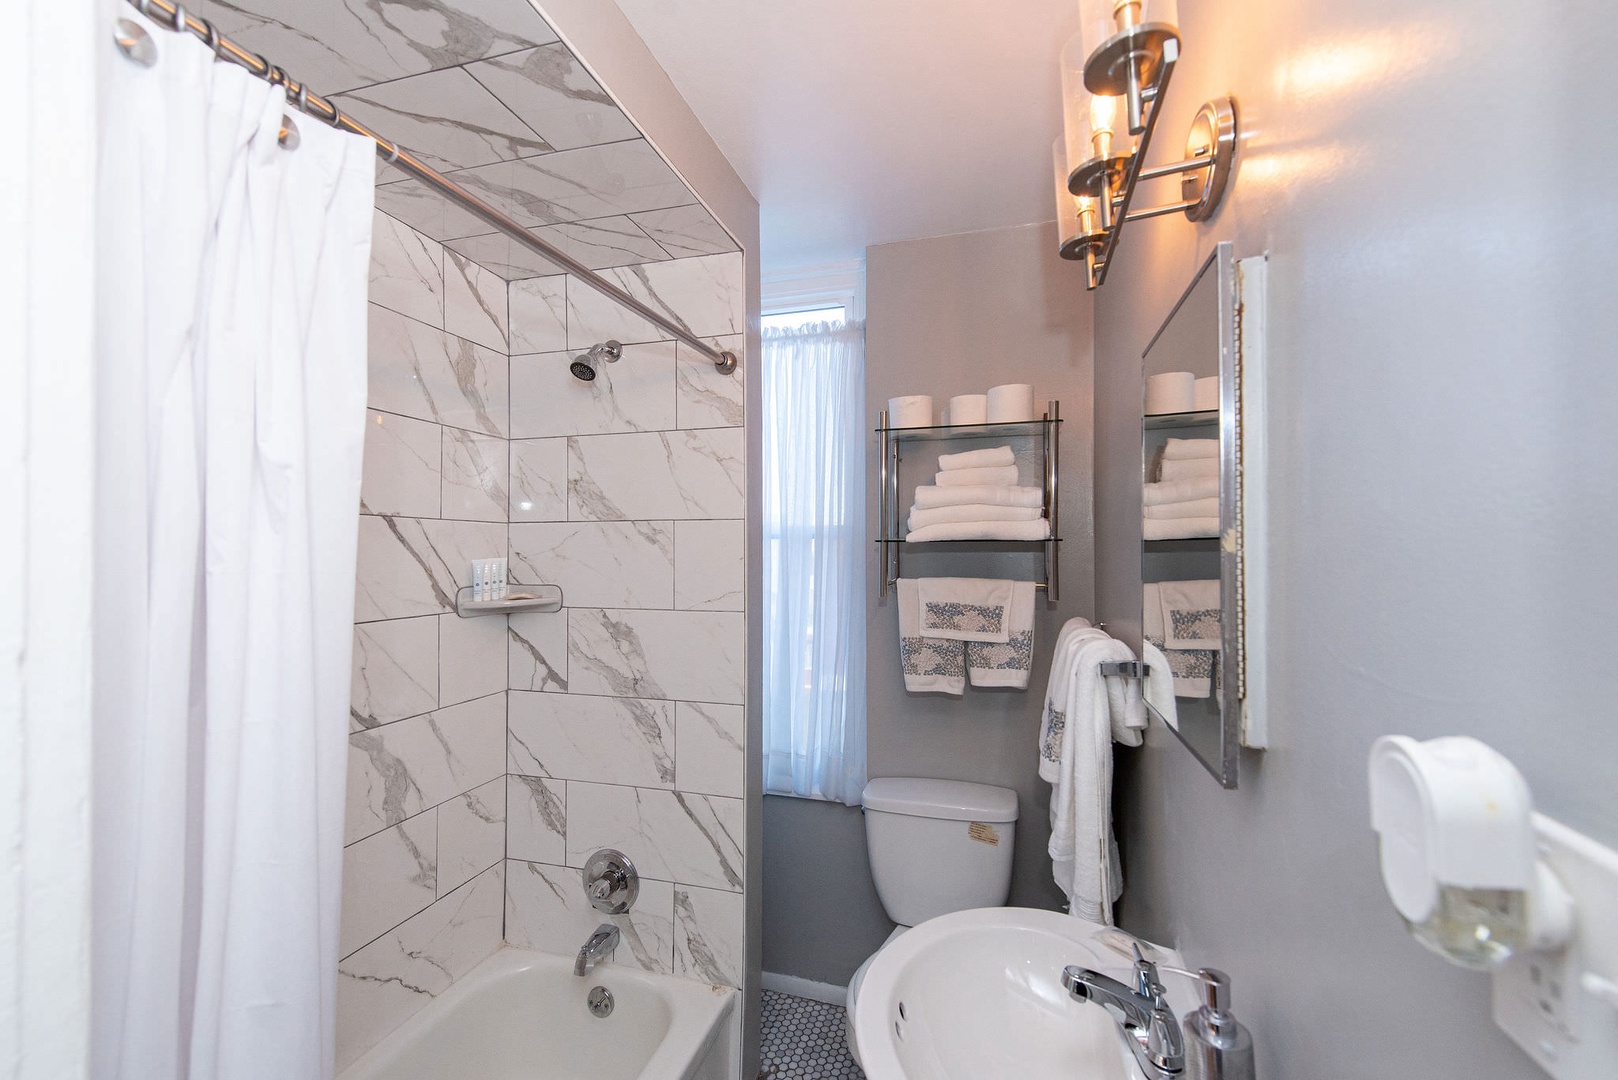 The full bathroom includes a pedestal sink & shower/tub combo